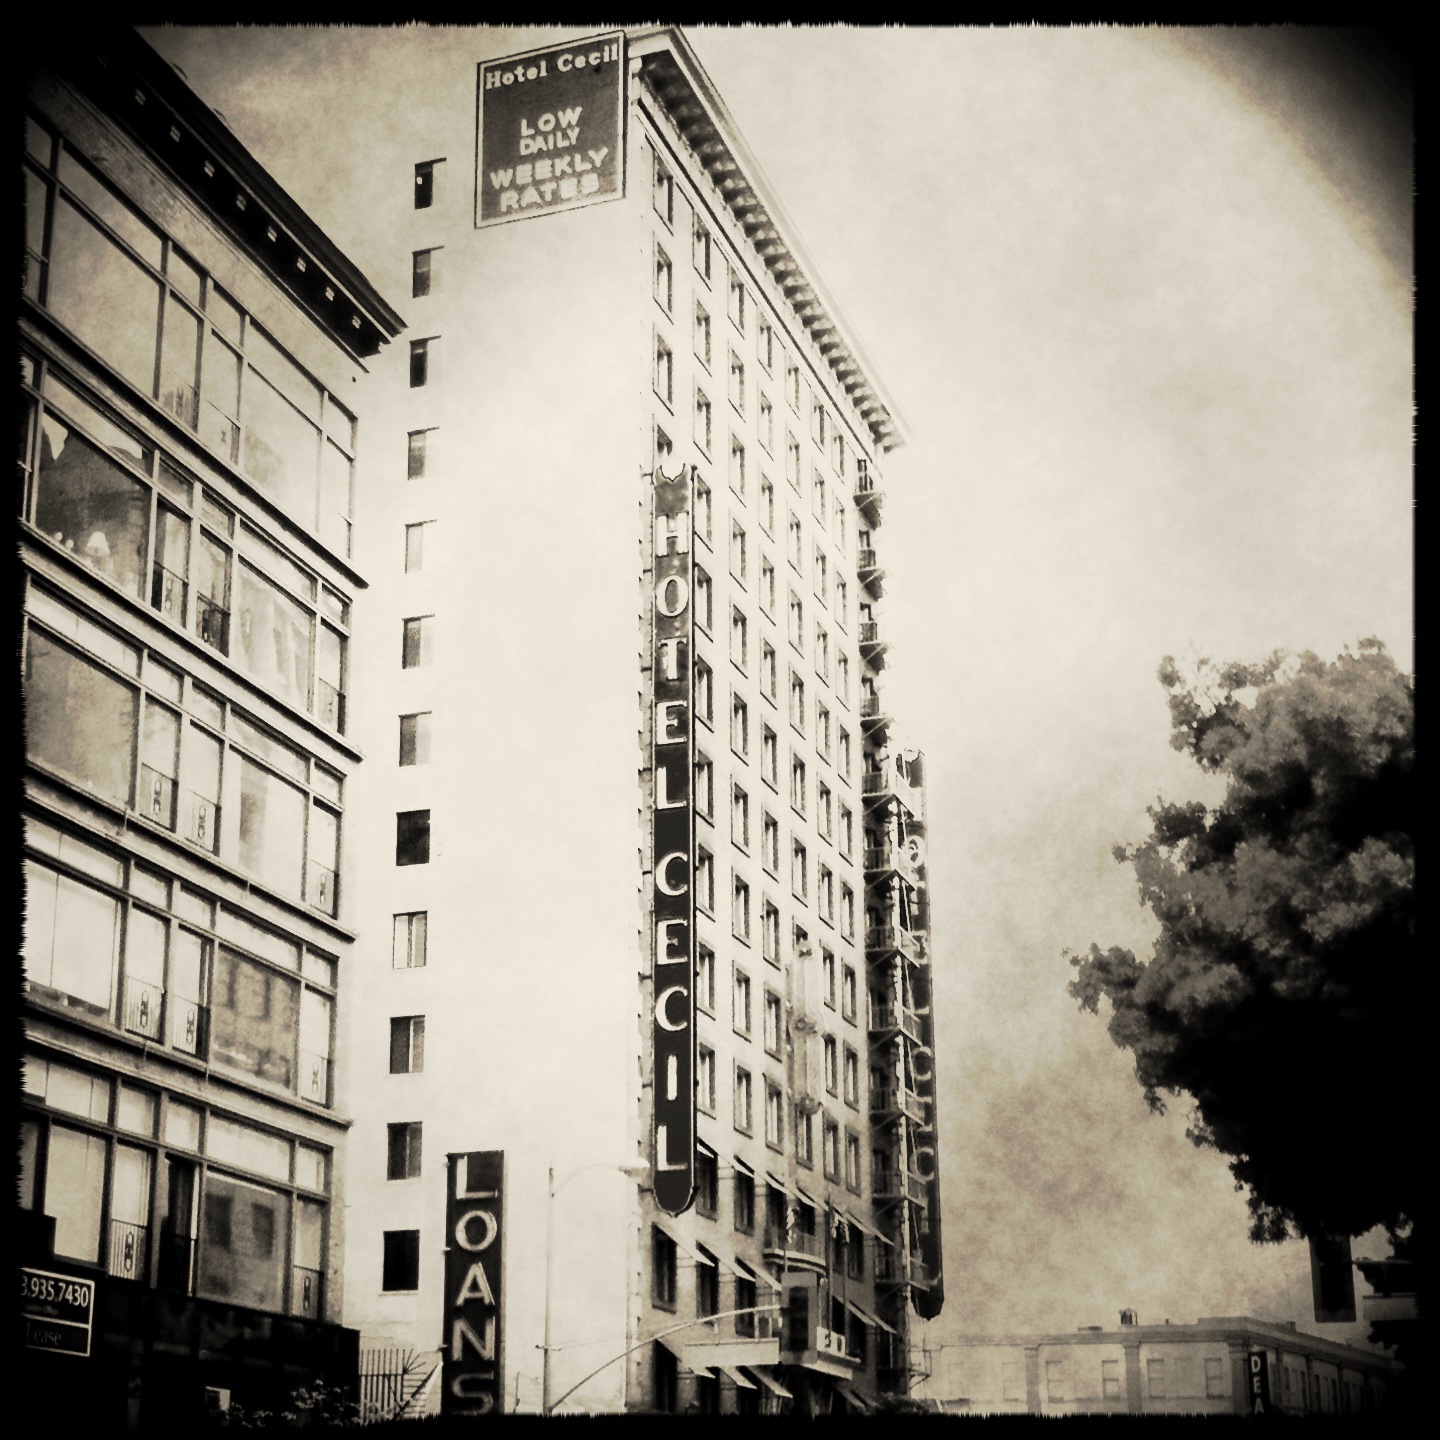 hotelcecilhistory